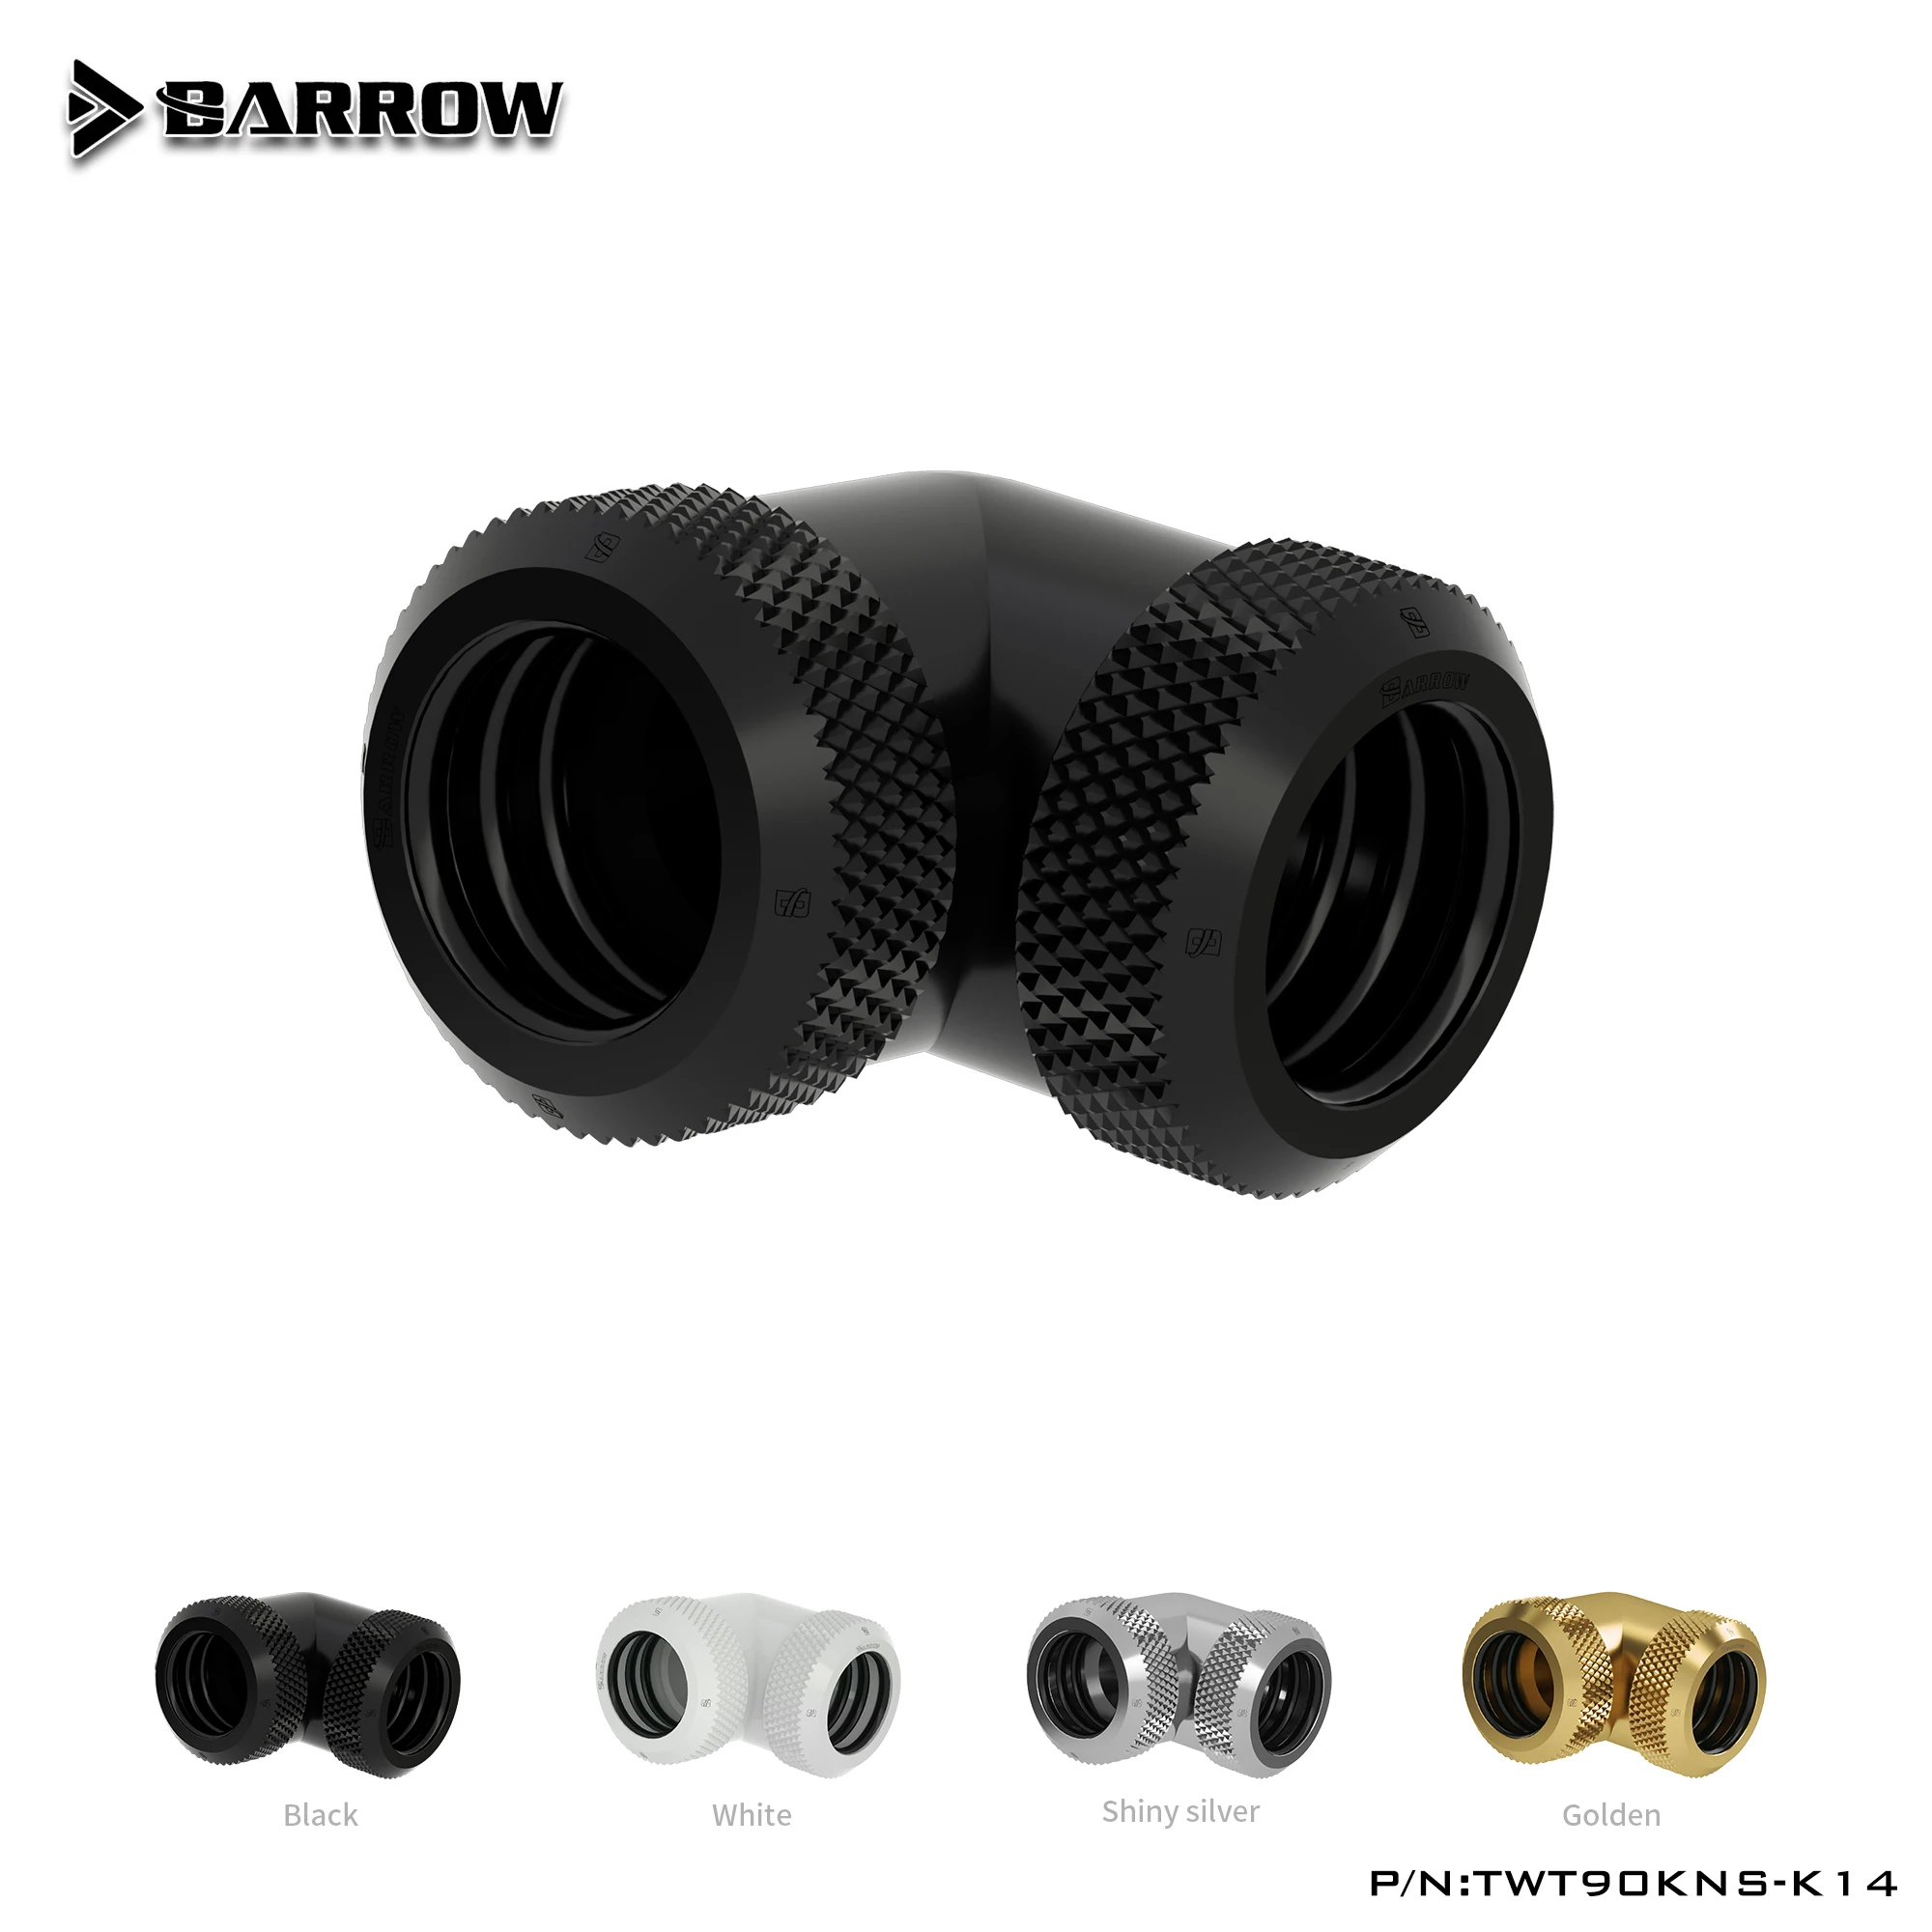 

Barrow Water Cooling Fittings TWT90KNS-K14,G1/4'' Thread Dual 90 Degree Rotary Fitting Adapter Rotating Use for OD14mm Hard Tube